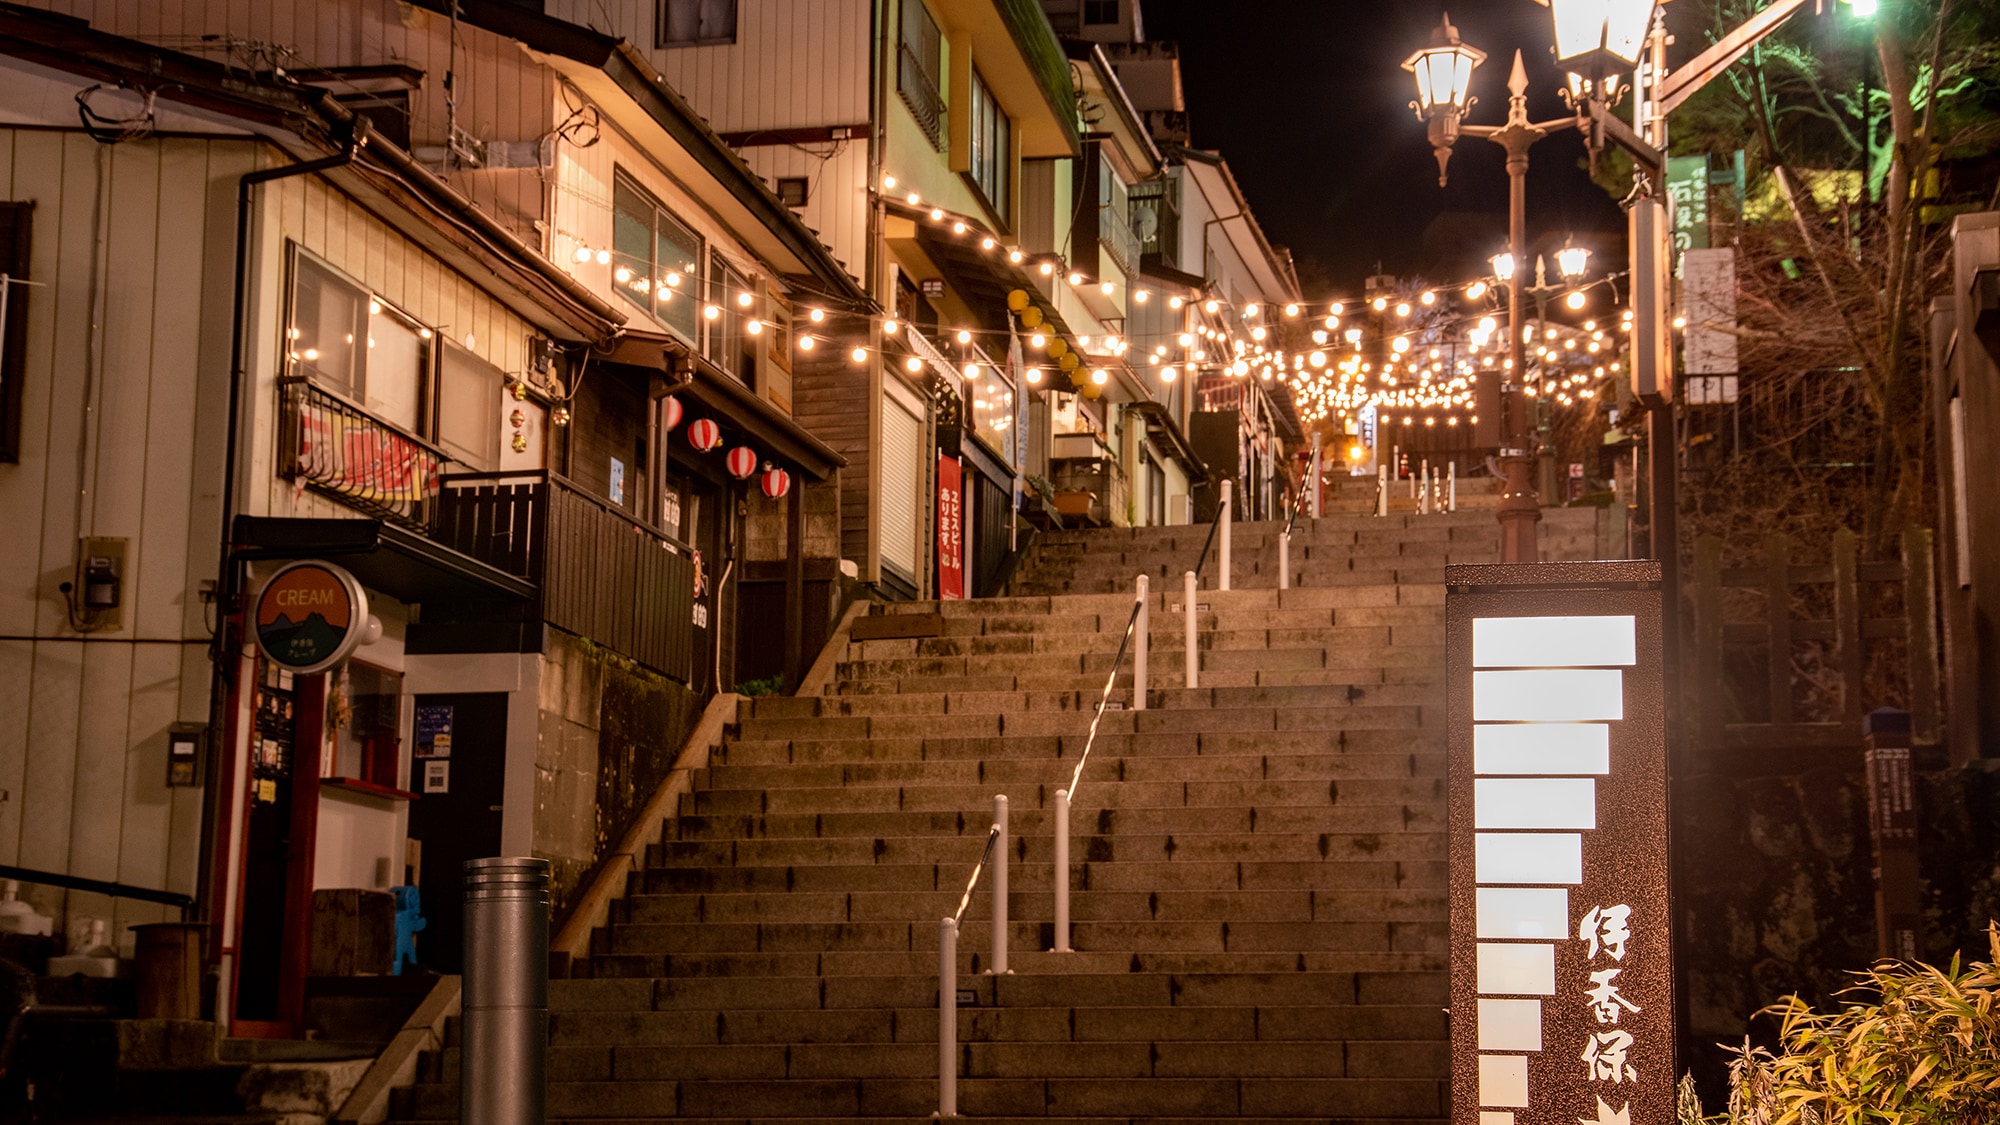 * [Sightseeing around] It is also recommended to take a walk in the stone steps at night in a colored yukata.